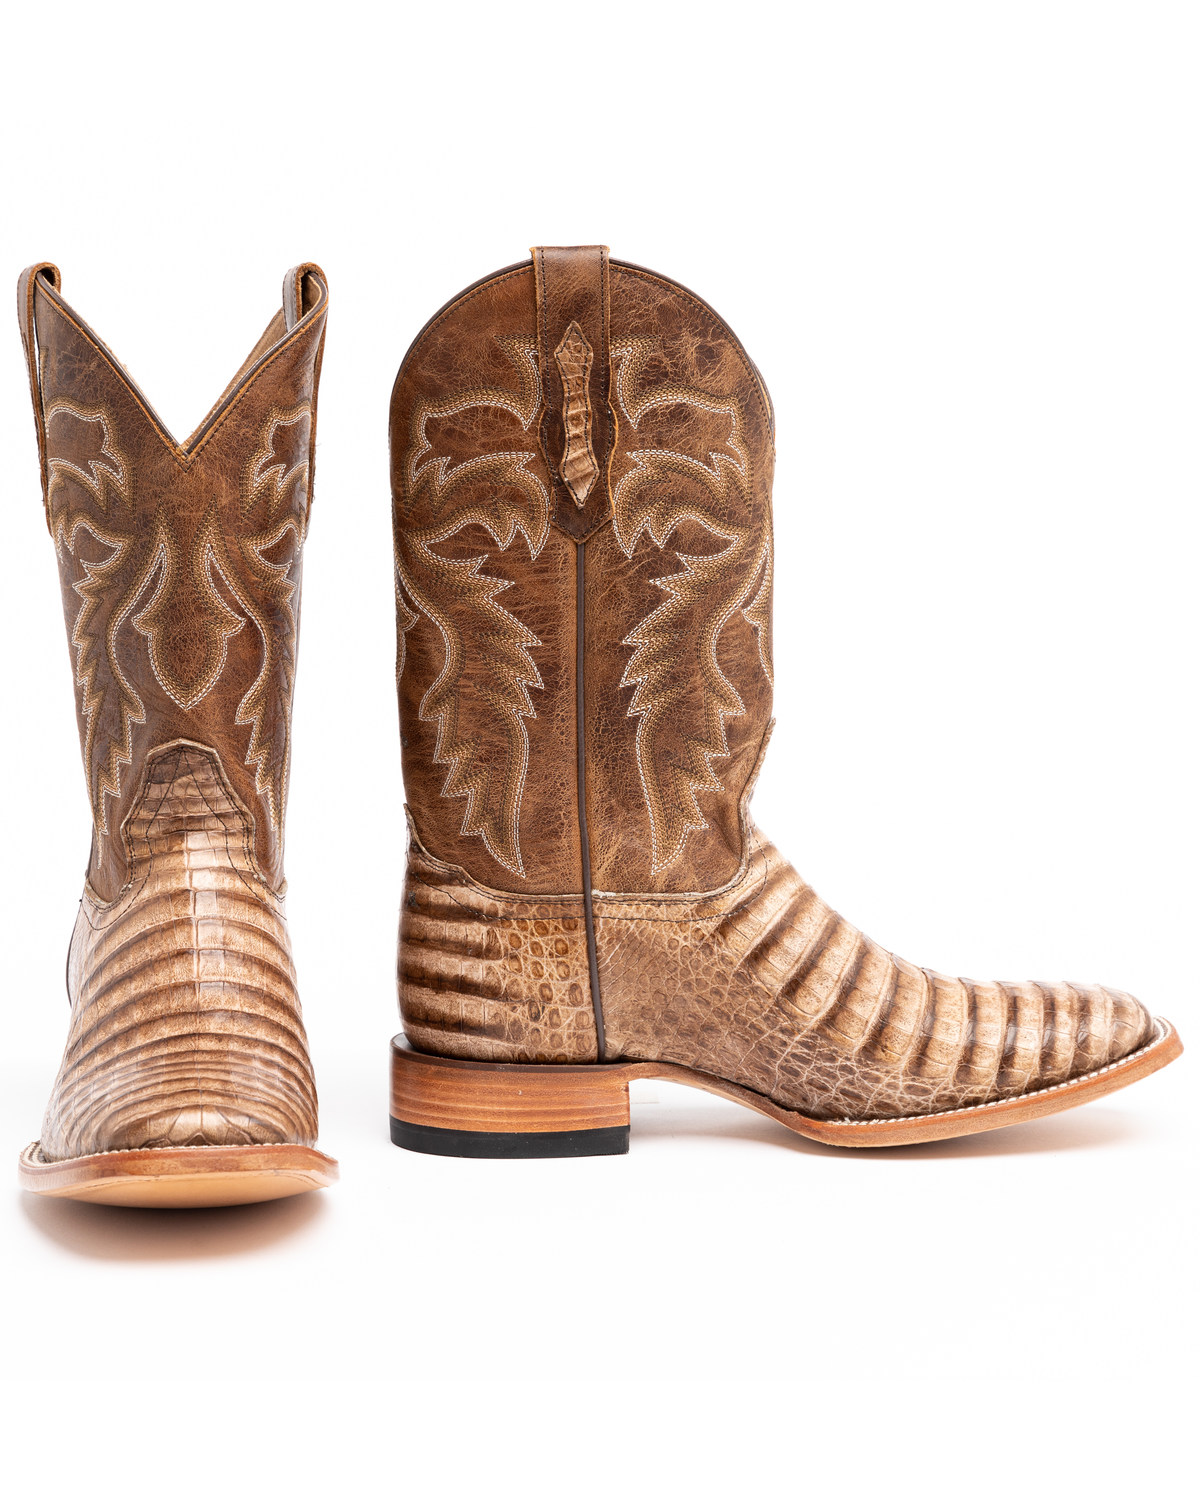 Cody James Men's Caiman Belly Western Boots - Broad Square Toe